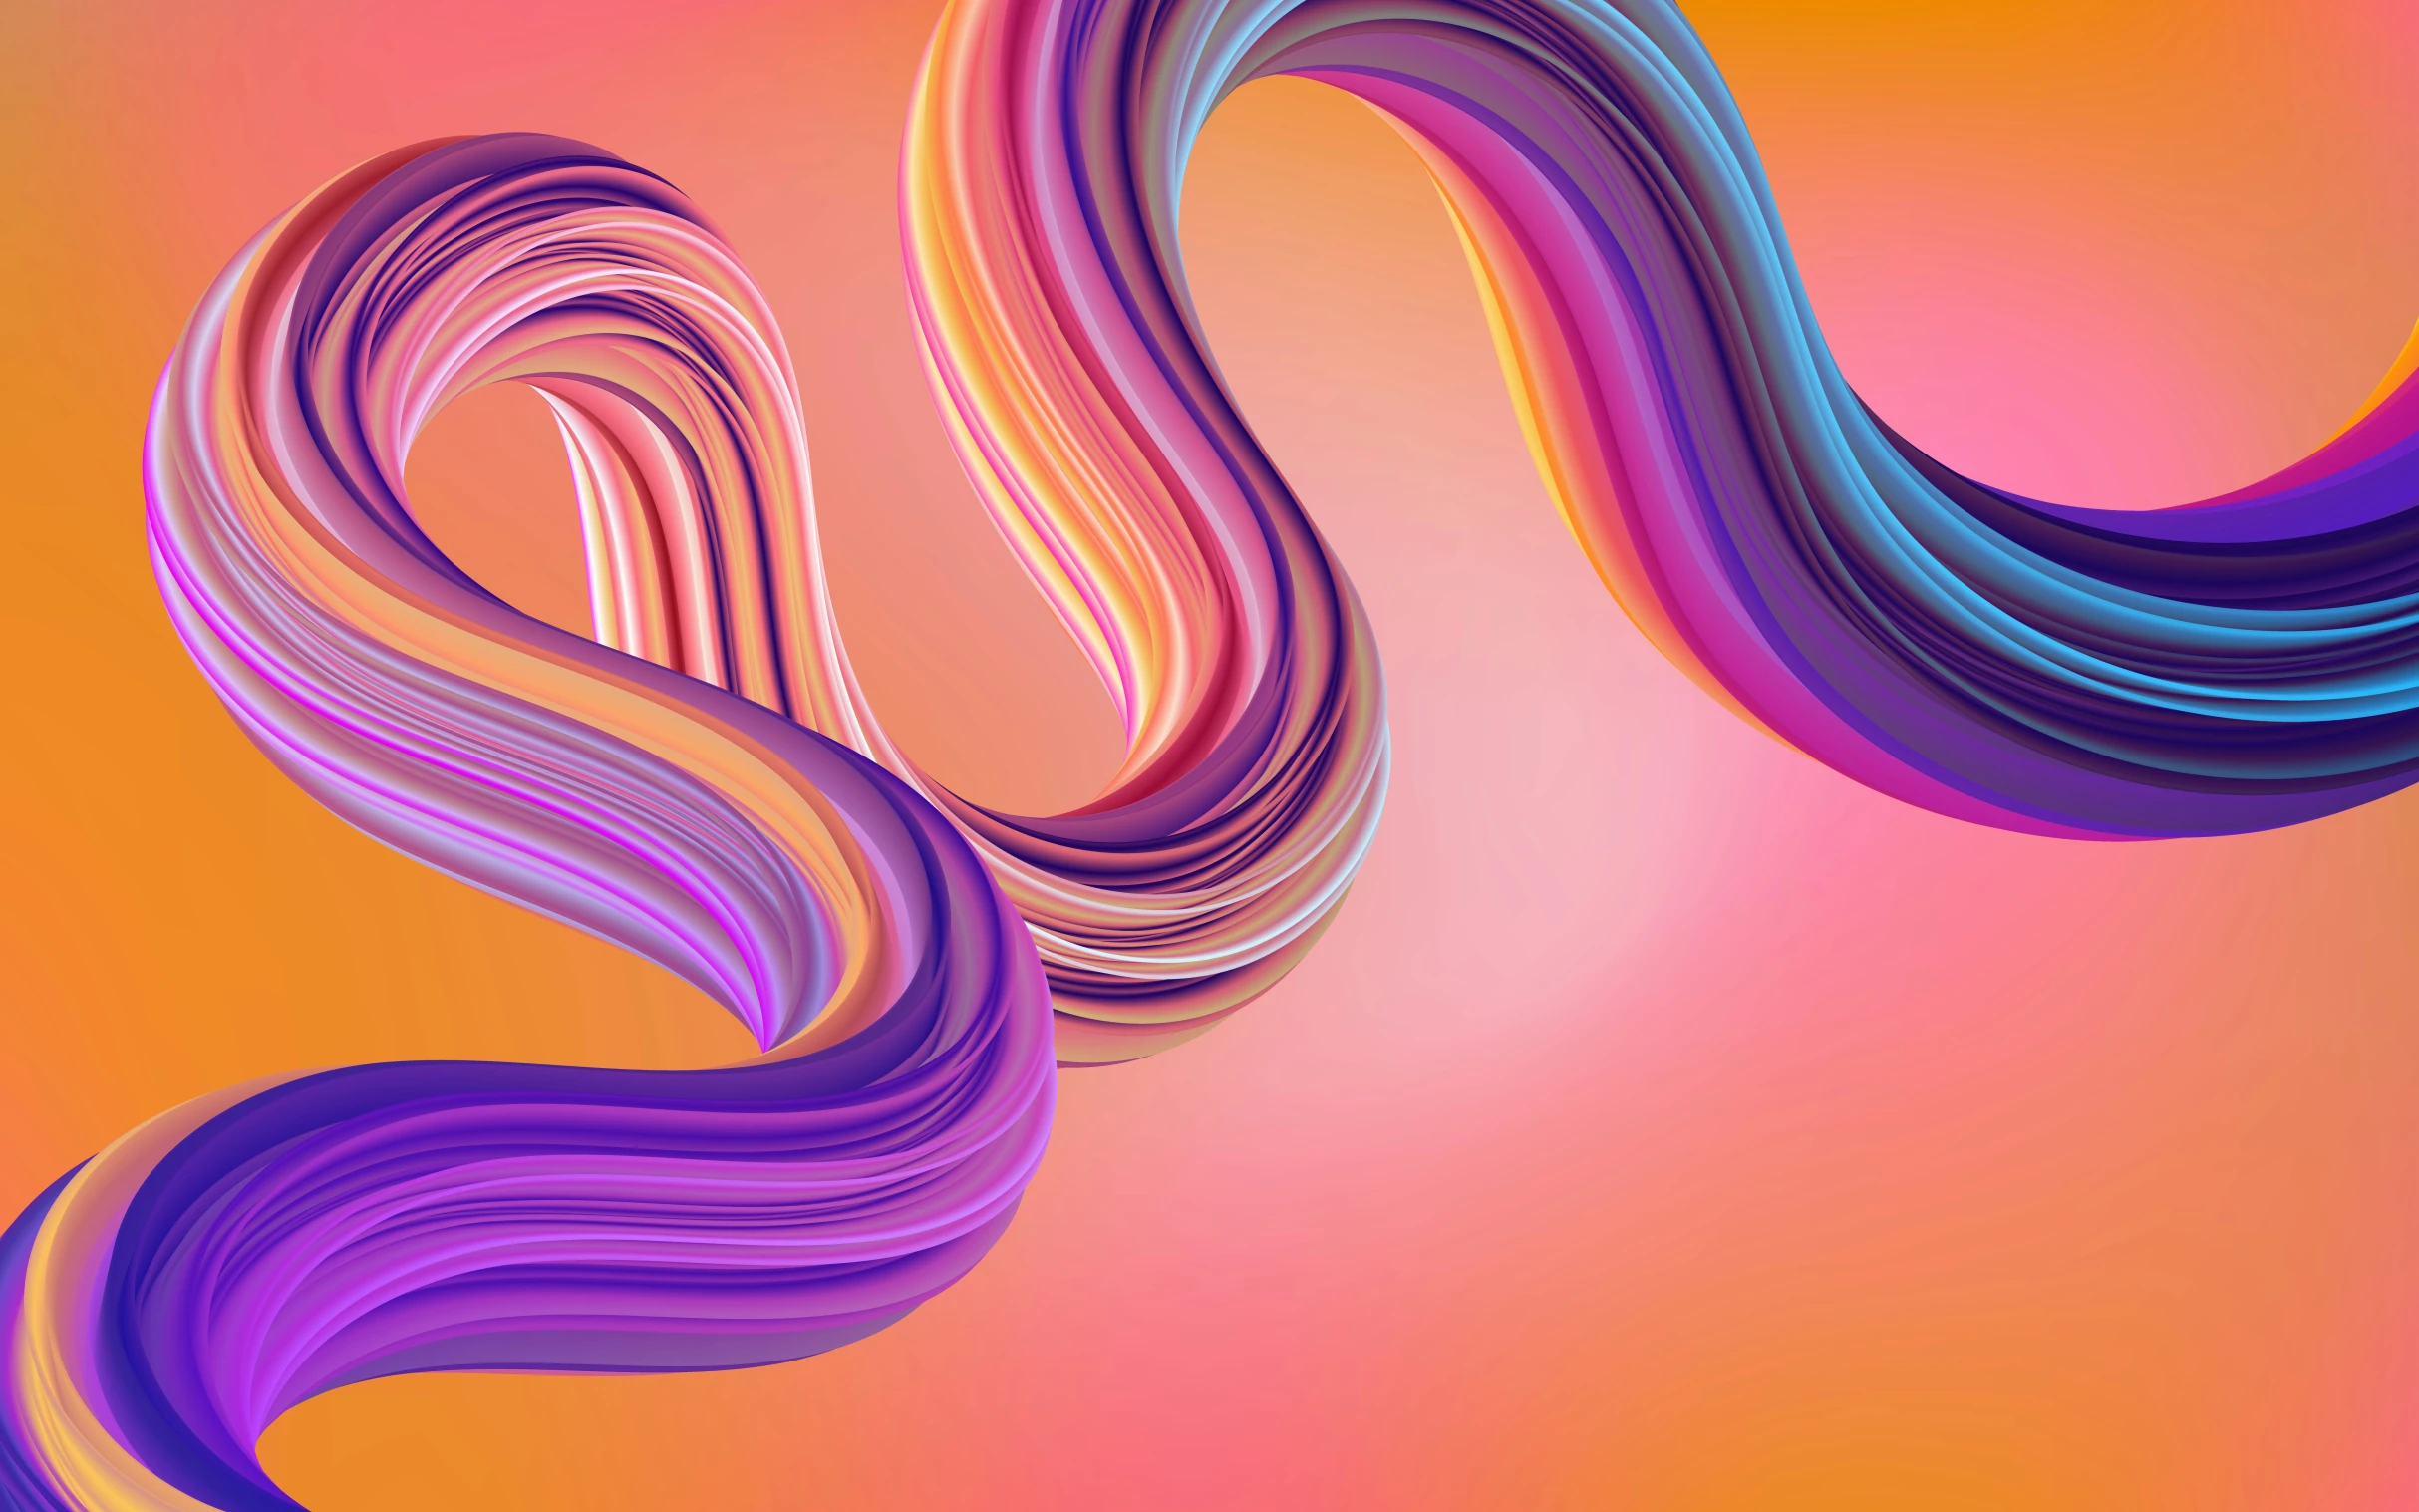 an abstract, colorful, wavy shape